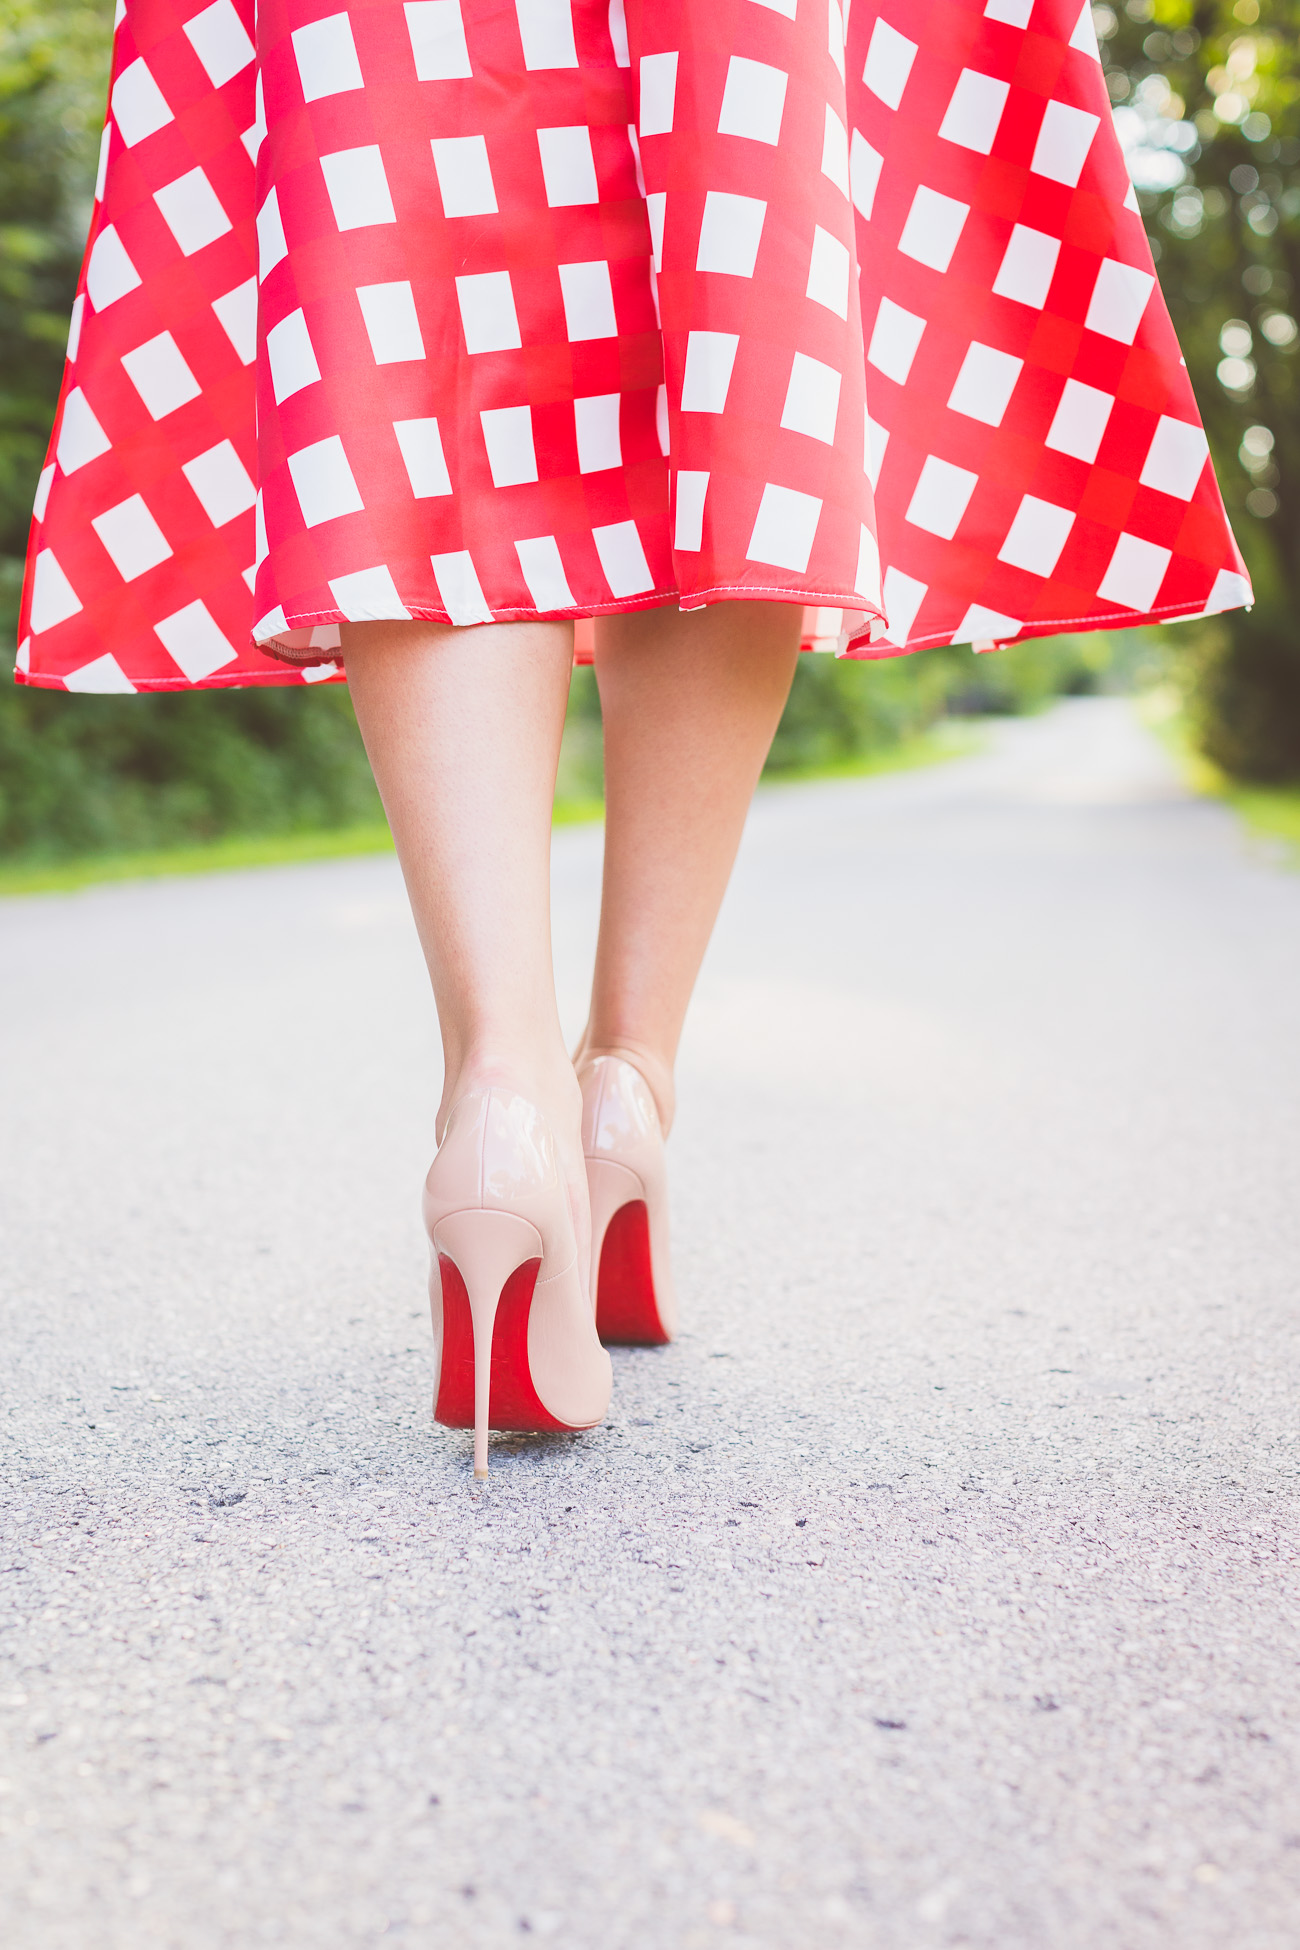 christian louboutins, louboutin so kate pumps, nude pumps, red soles, gingham skirt // a southern drawl